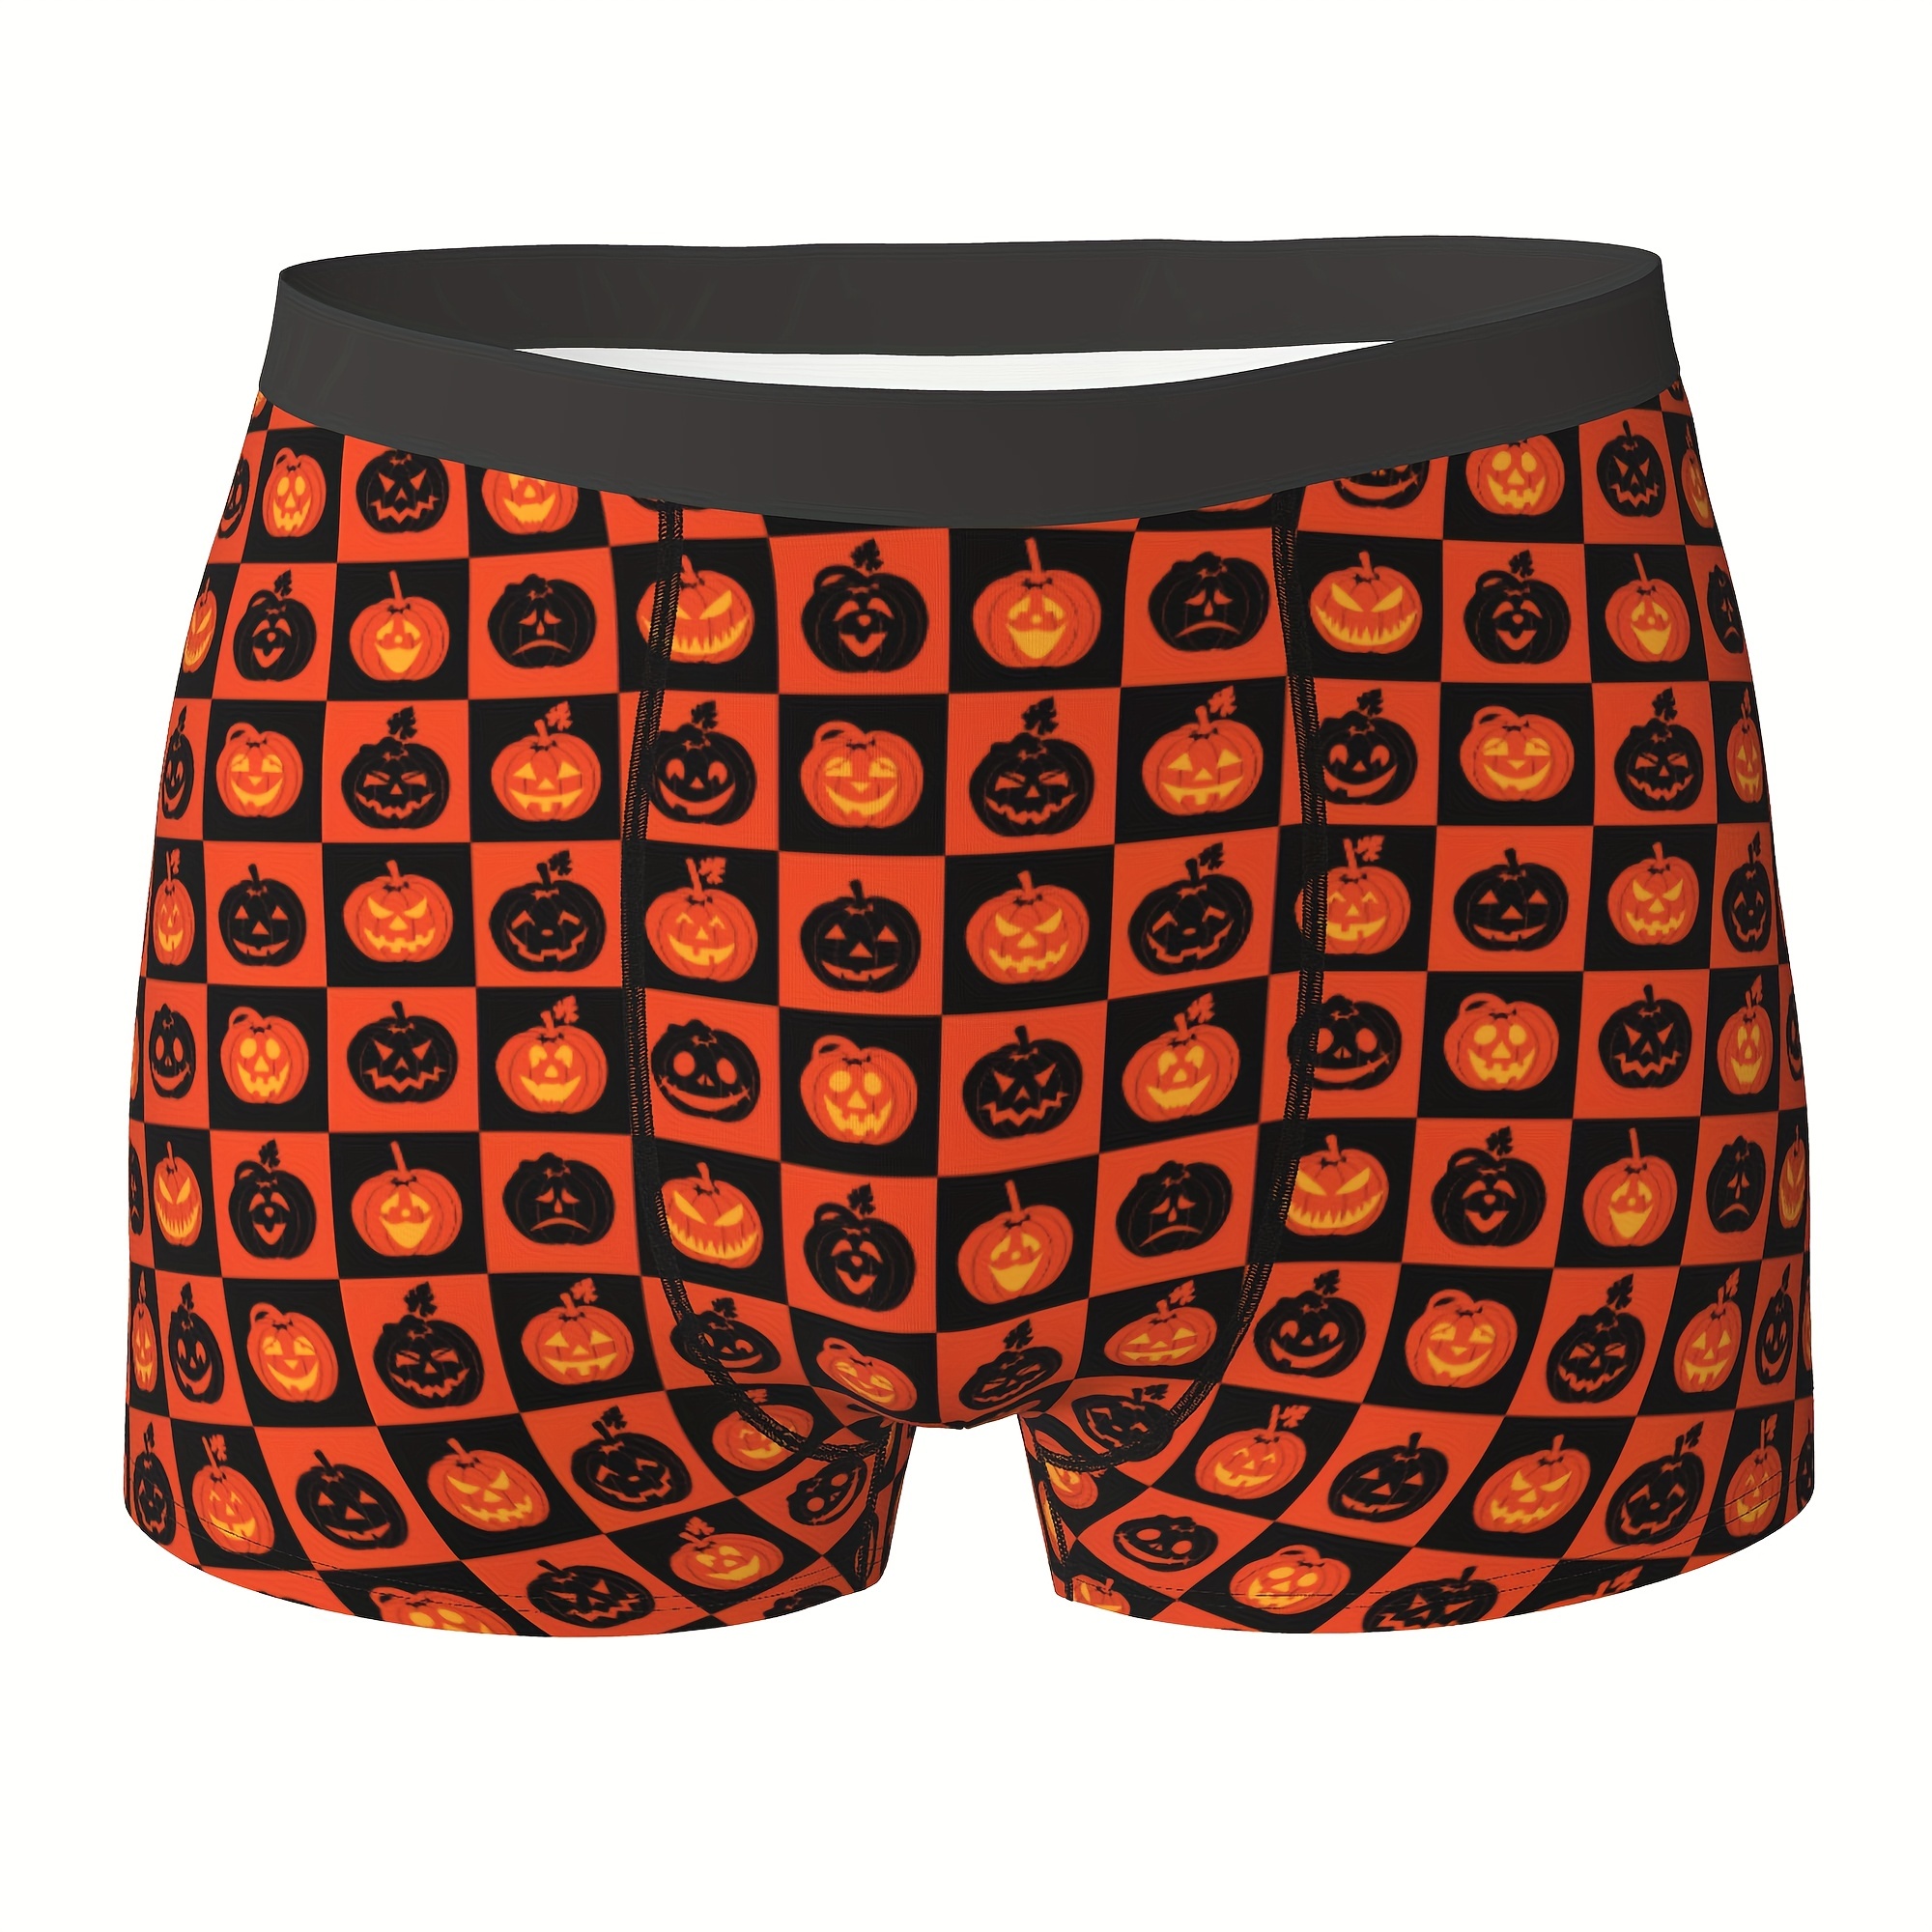 3pcs Halloween Pumpkin Pattern Print Men's Boxer Briefs, Comfortable  Breathable And Stylish For The Holiday Season